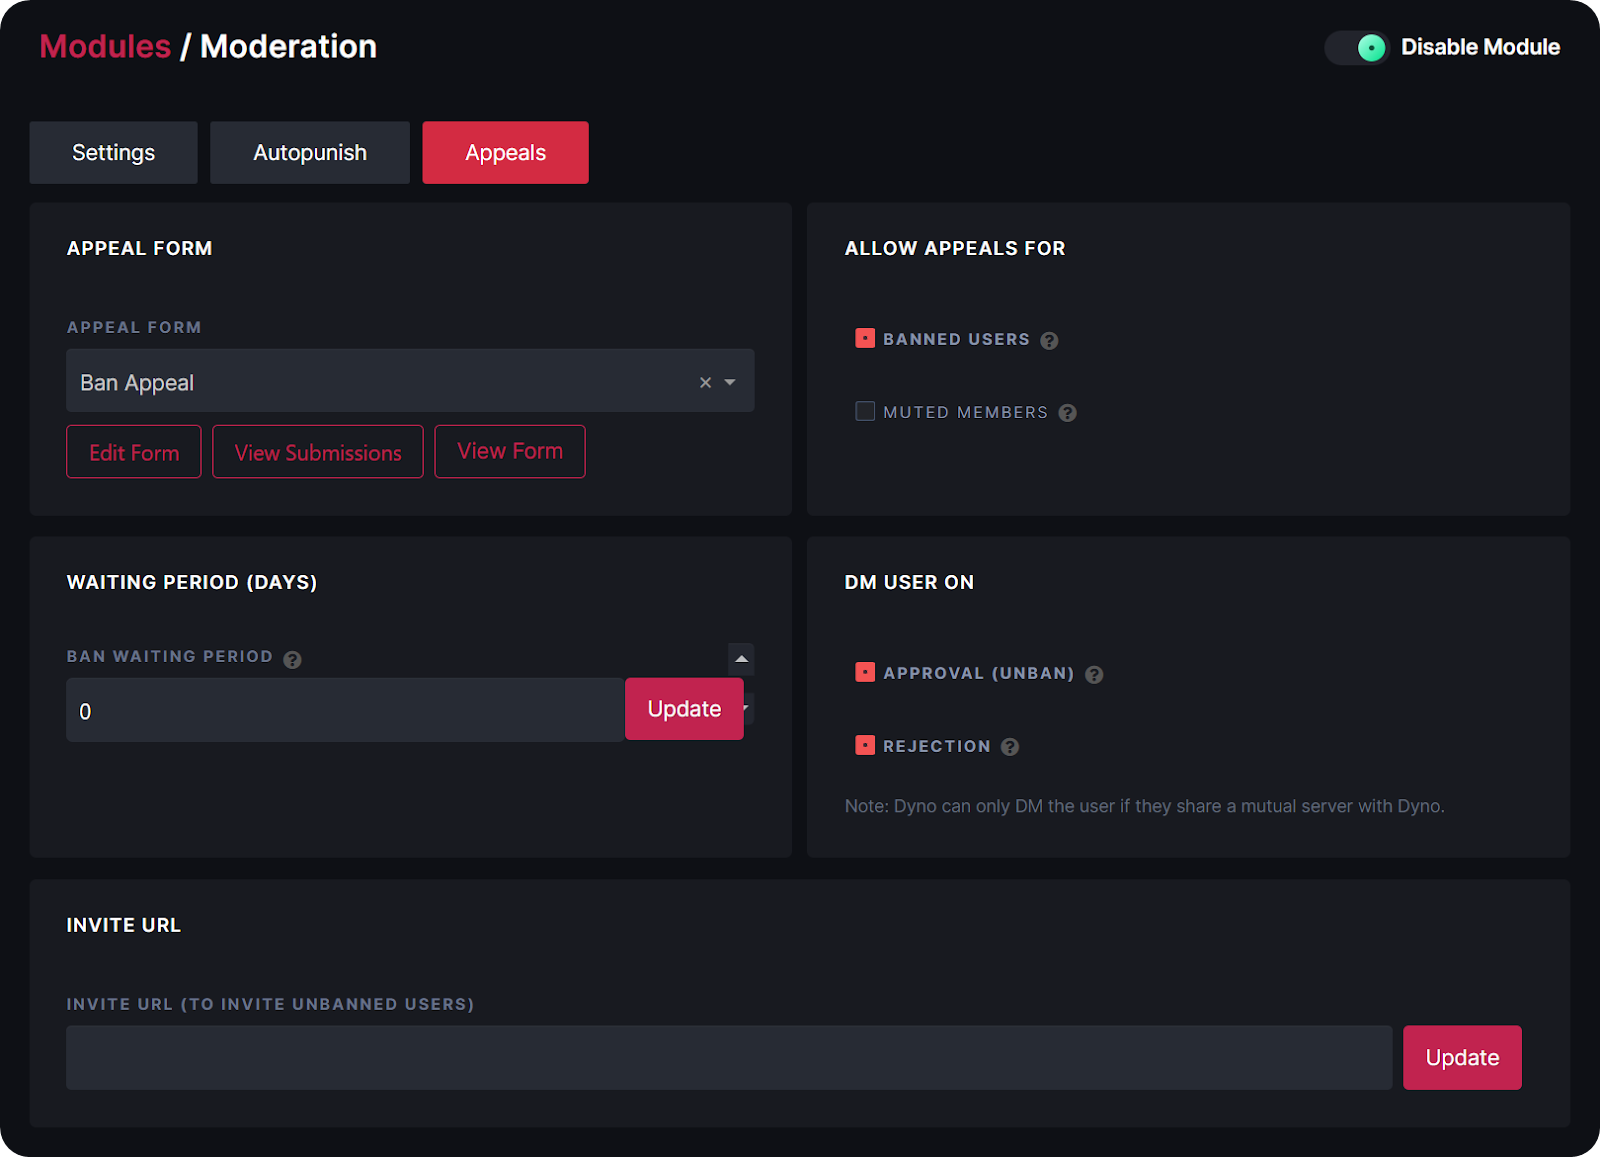 The Moderation module of Dyno's dashboard